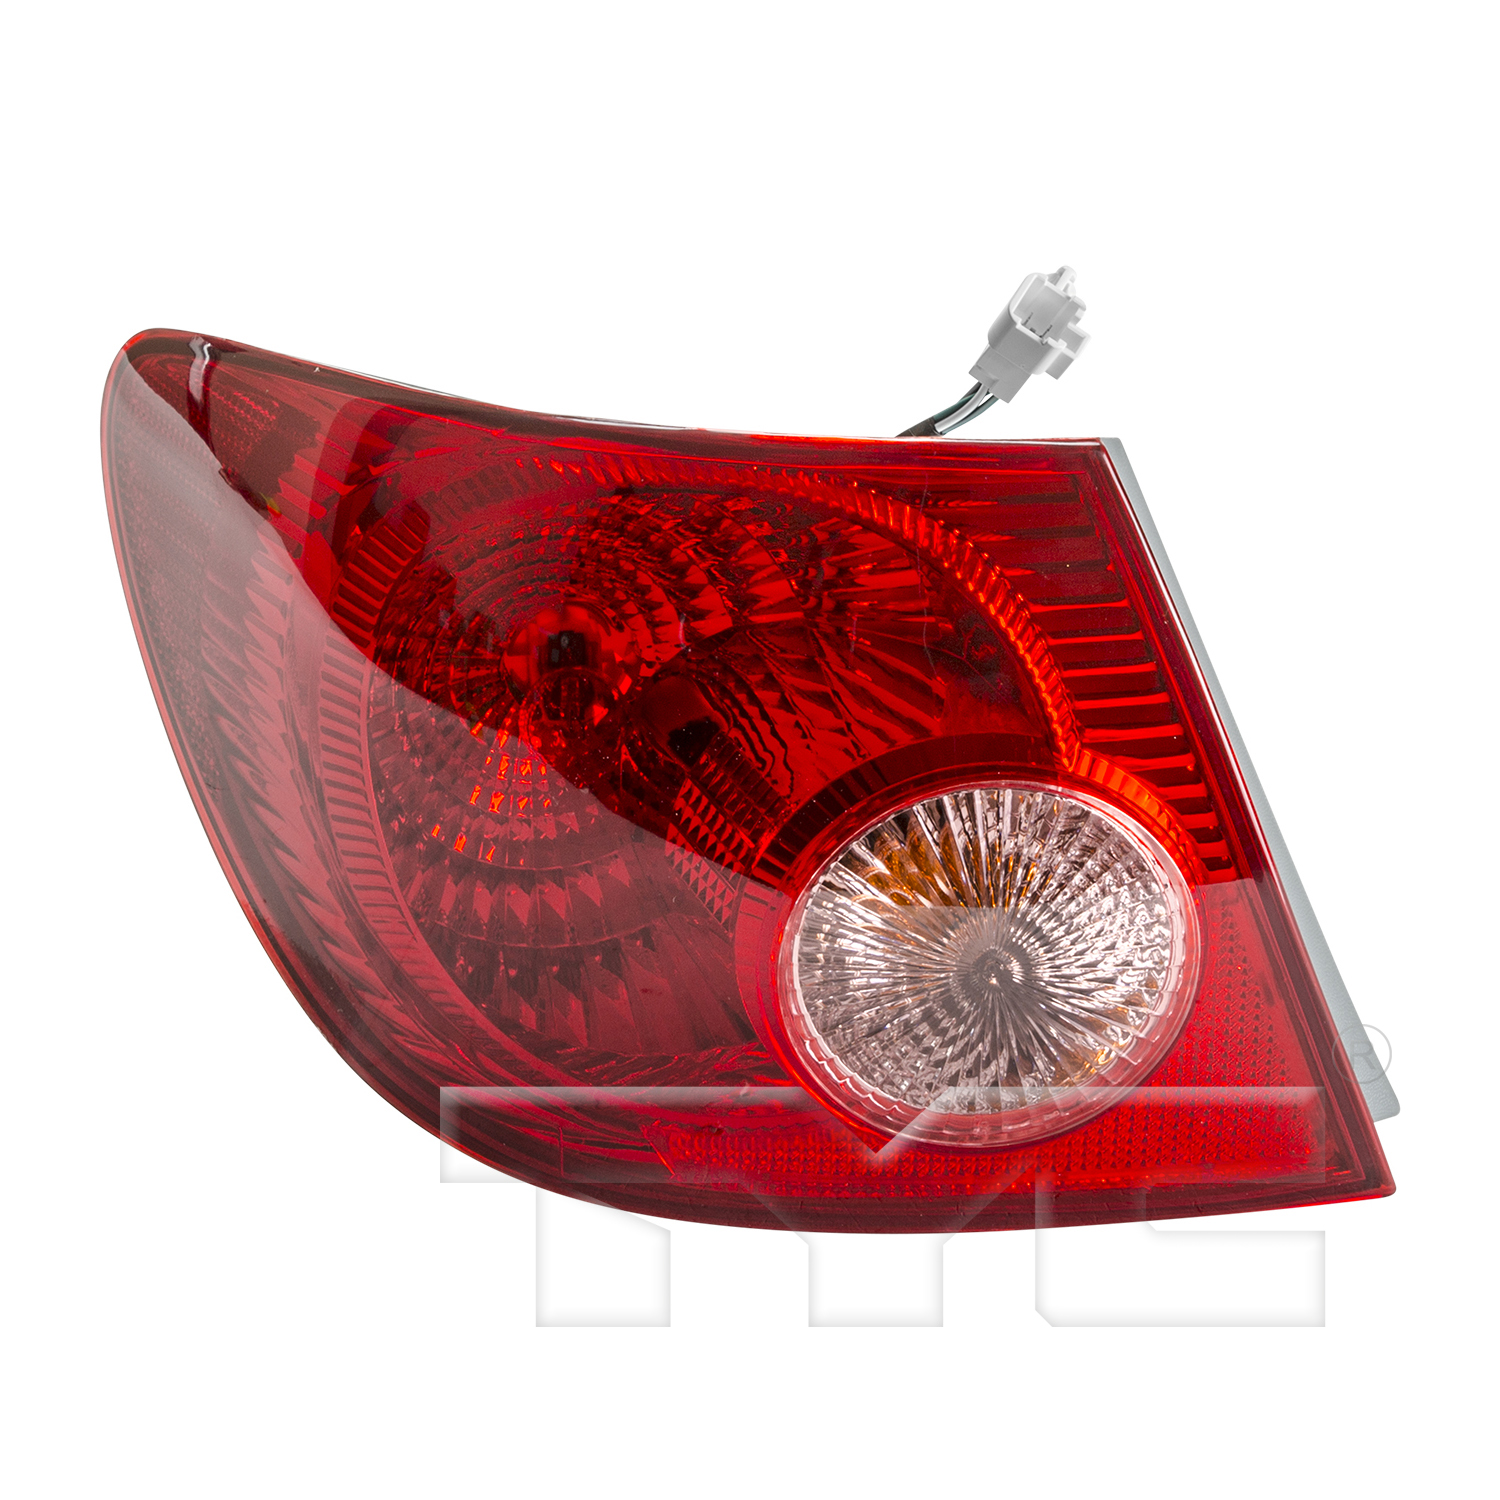 Aftermarket TAILLIGHTS for TOYOTA - COROLLA, COROLLA,05-08,LT Taillamp assy